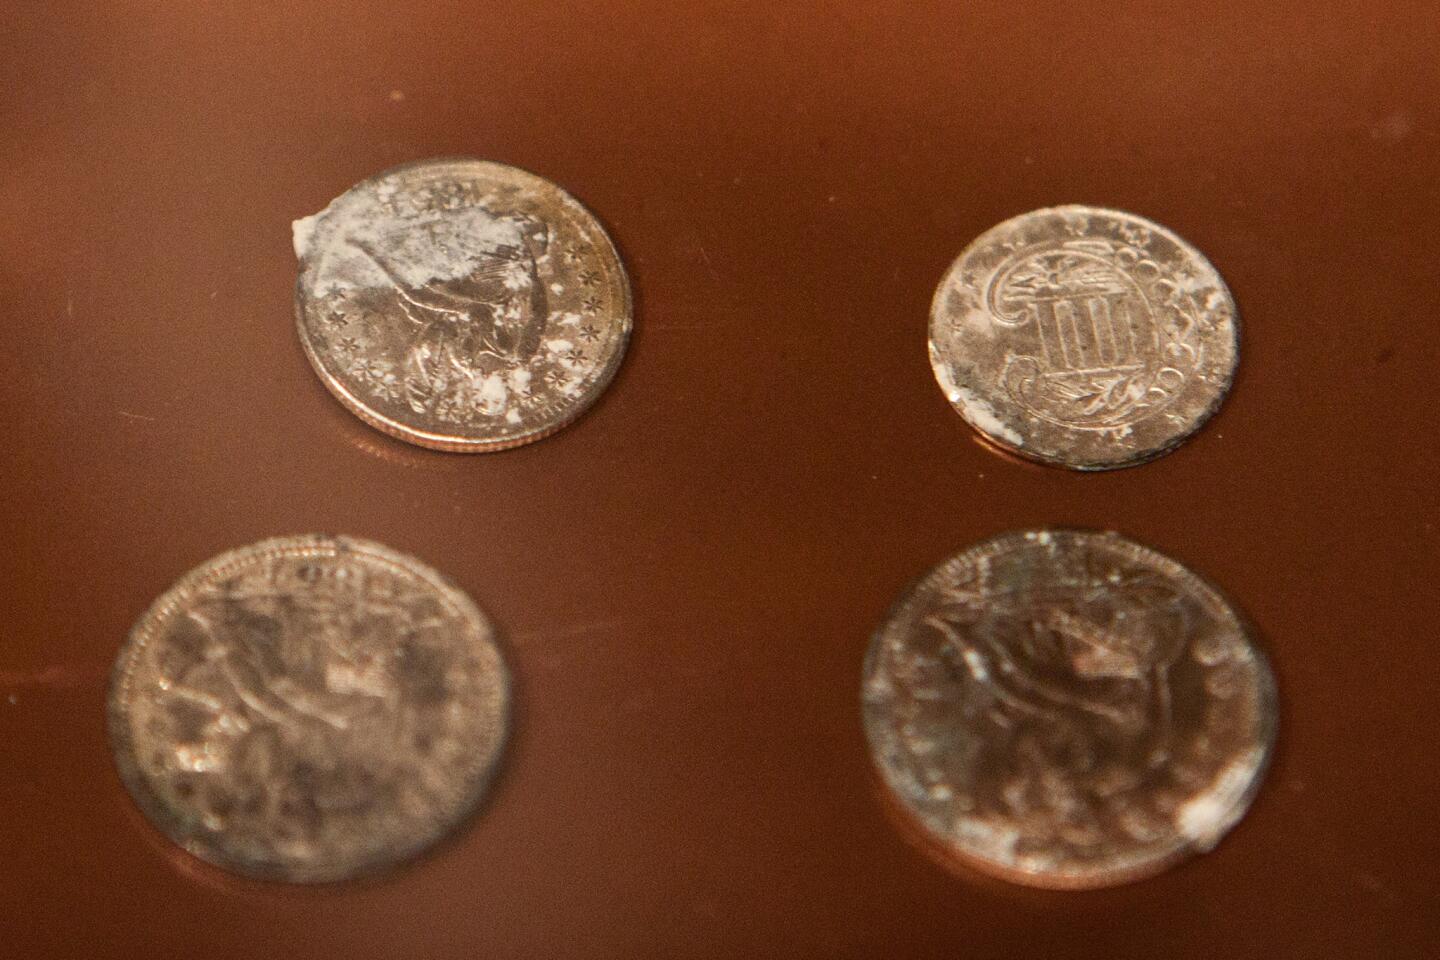 Silver and copper coins dating from 1652 to 1855, found in a 1795 time capsule, are displayed at the Museum of Fine Arts on Jan. 6, 2015 in Boston